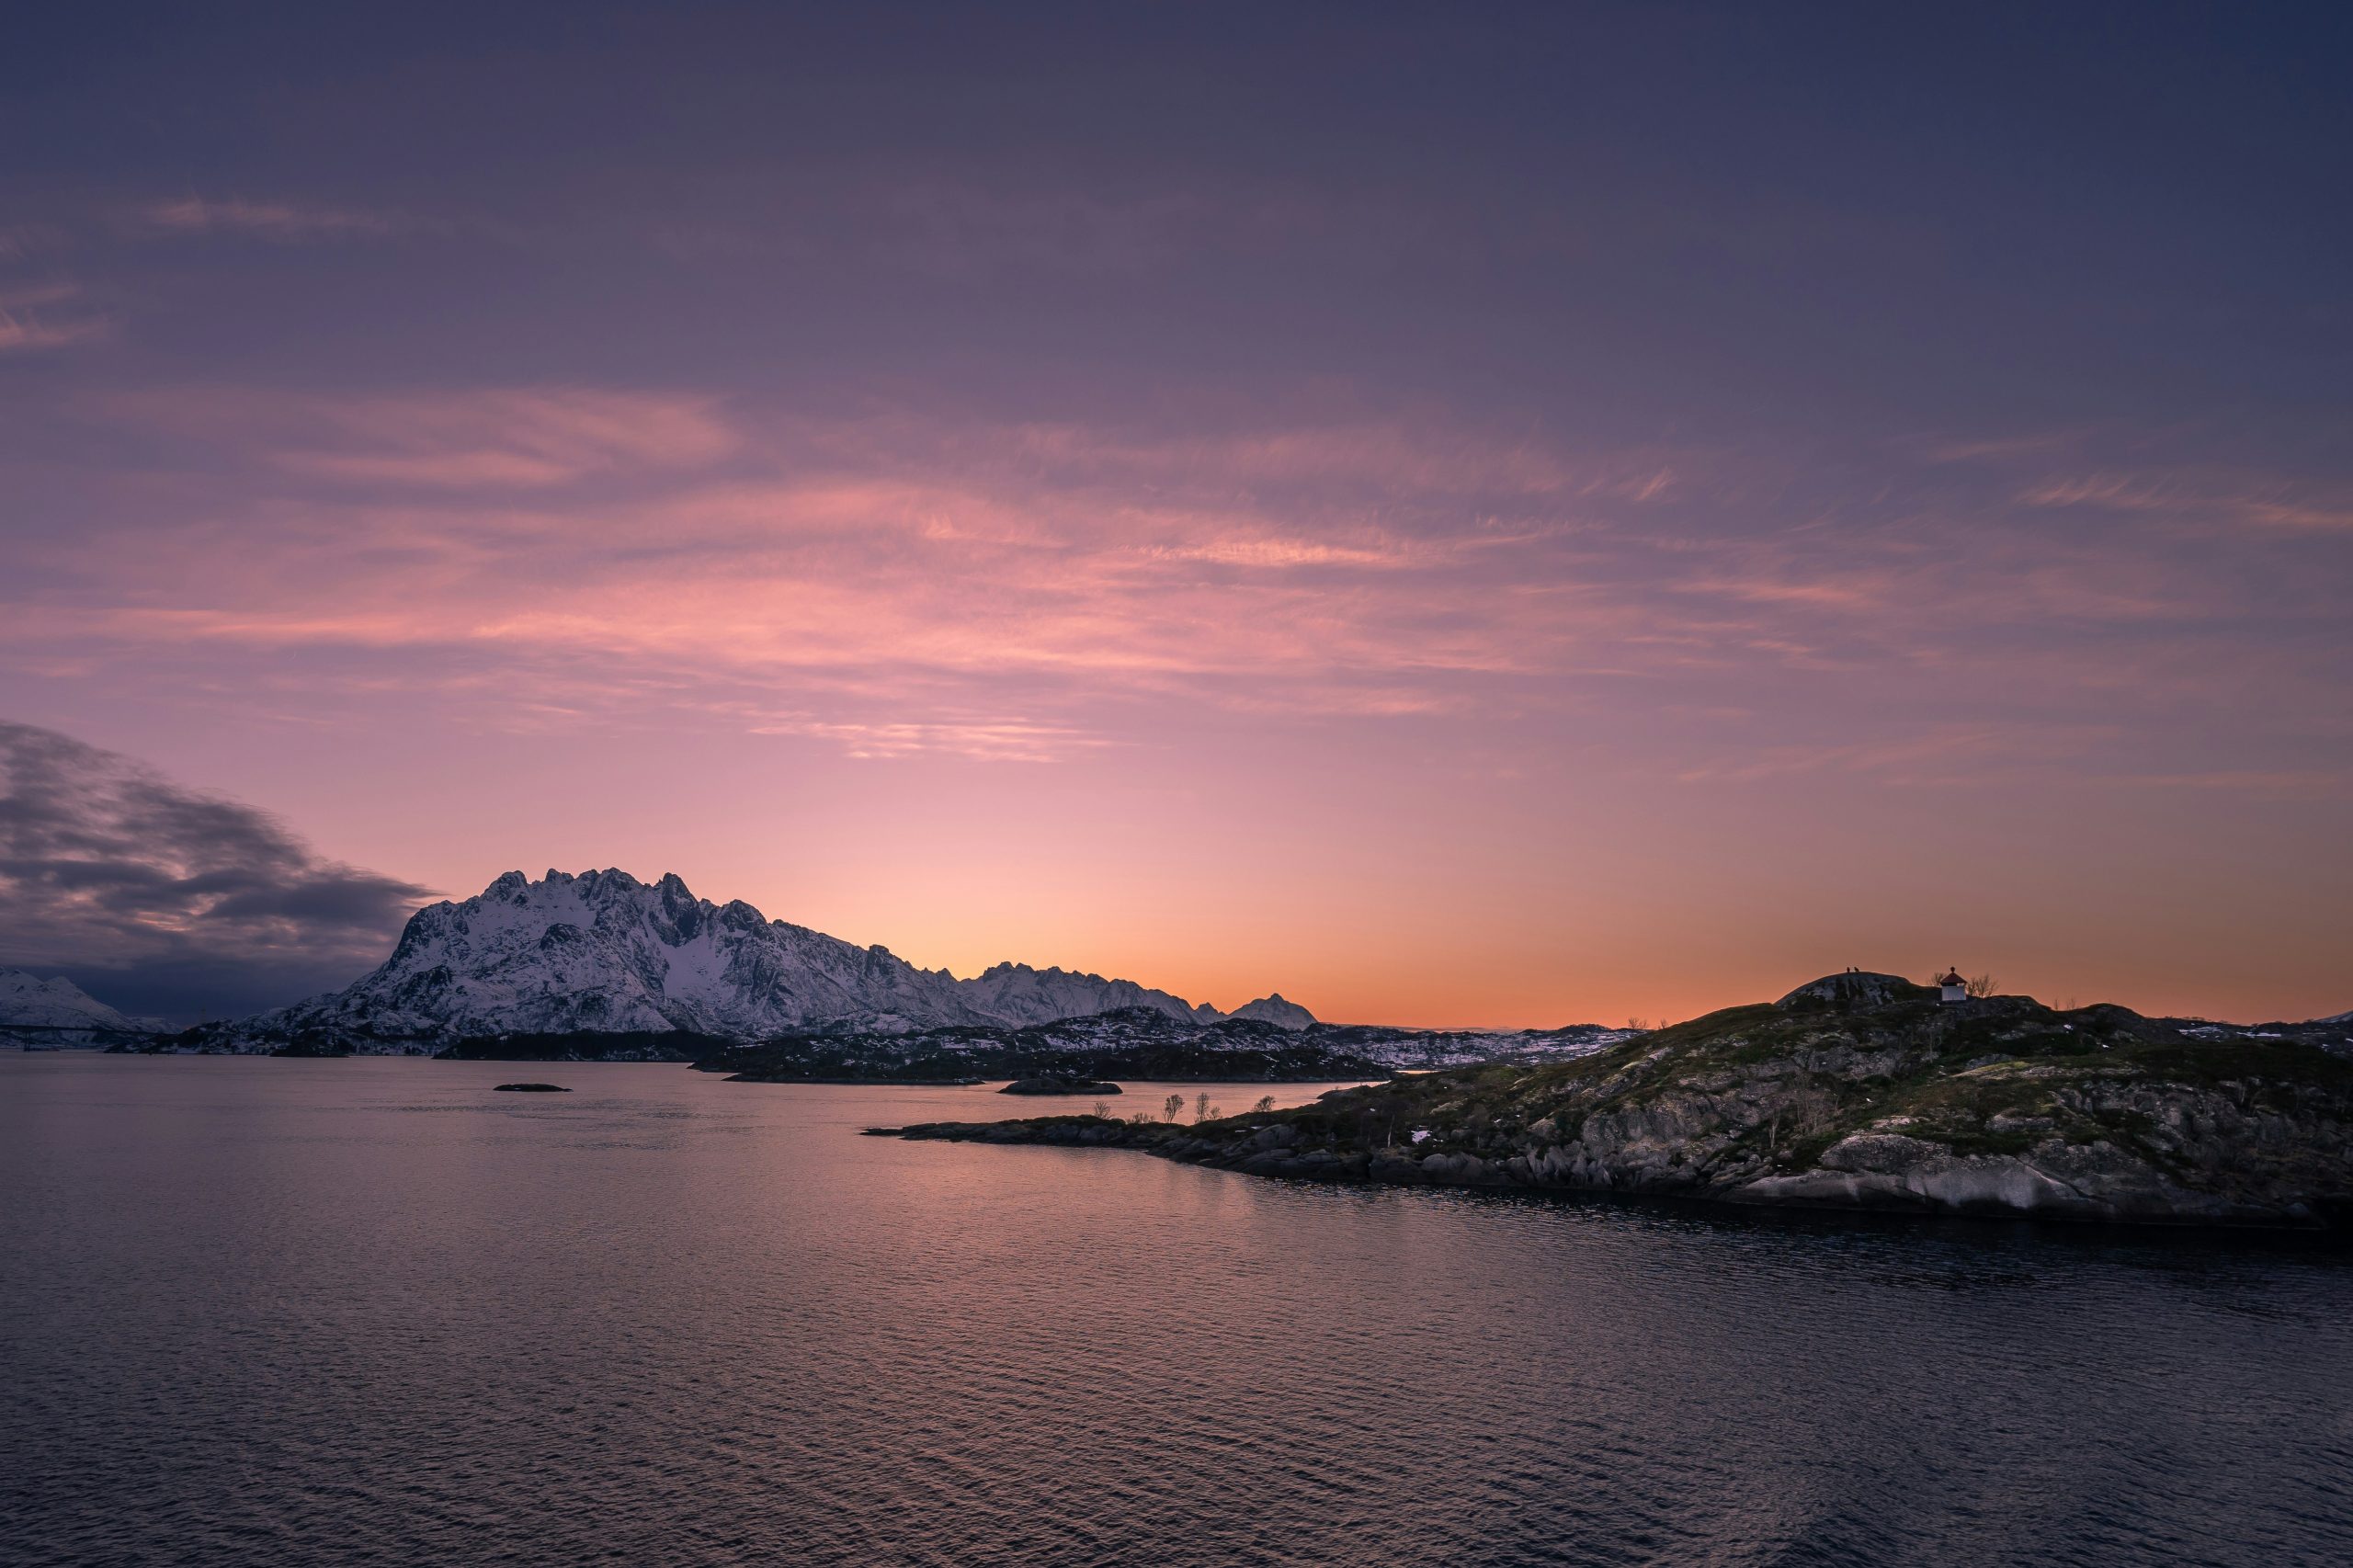 explore the stunning norway fjords and experience the breathtaking natural beauty of the scandinavian landscape.